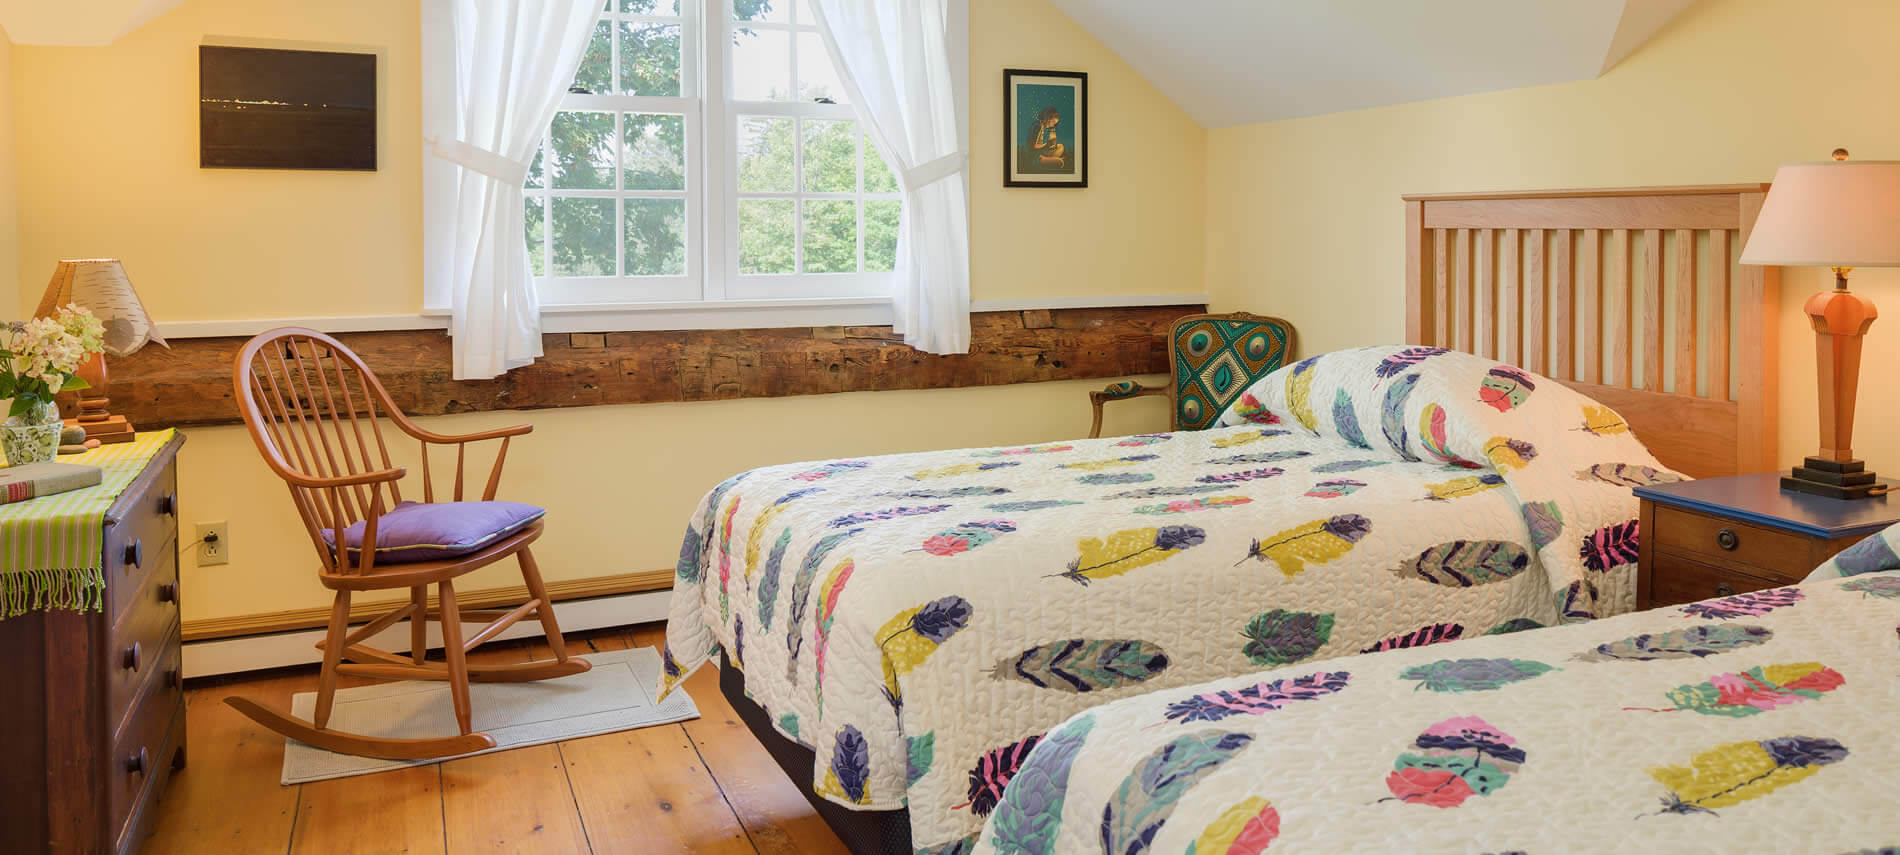 Bright vaulted room with yellow walls, wide plank wood floors, wood rocking chair and two beds with colorful quilts